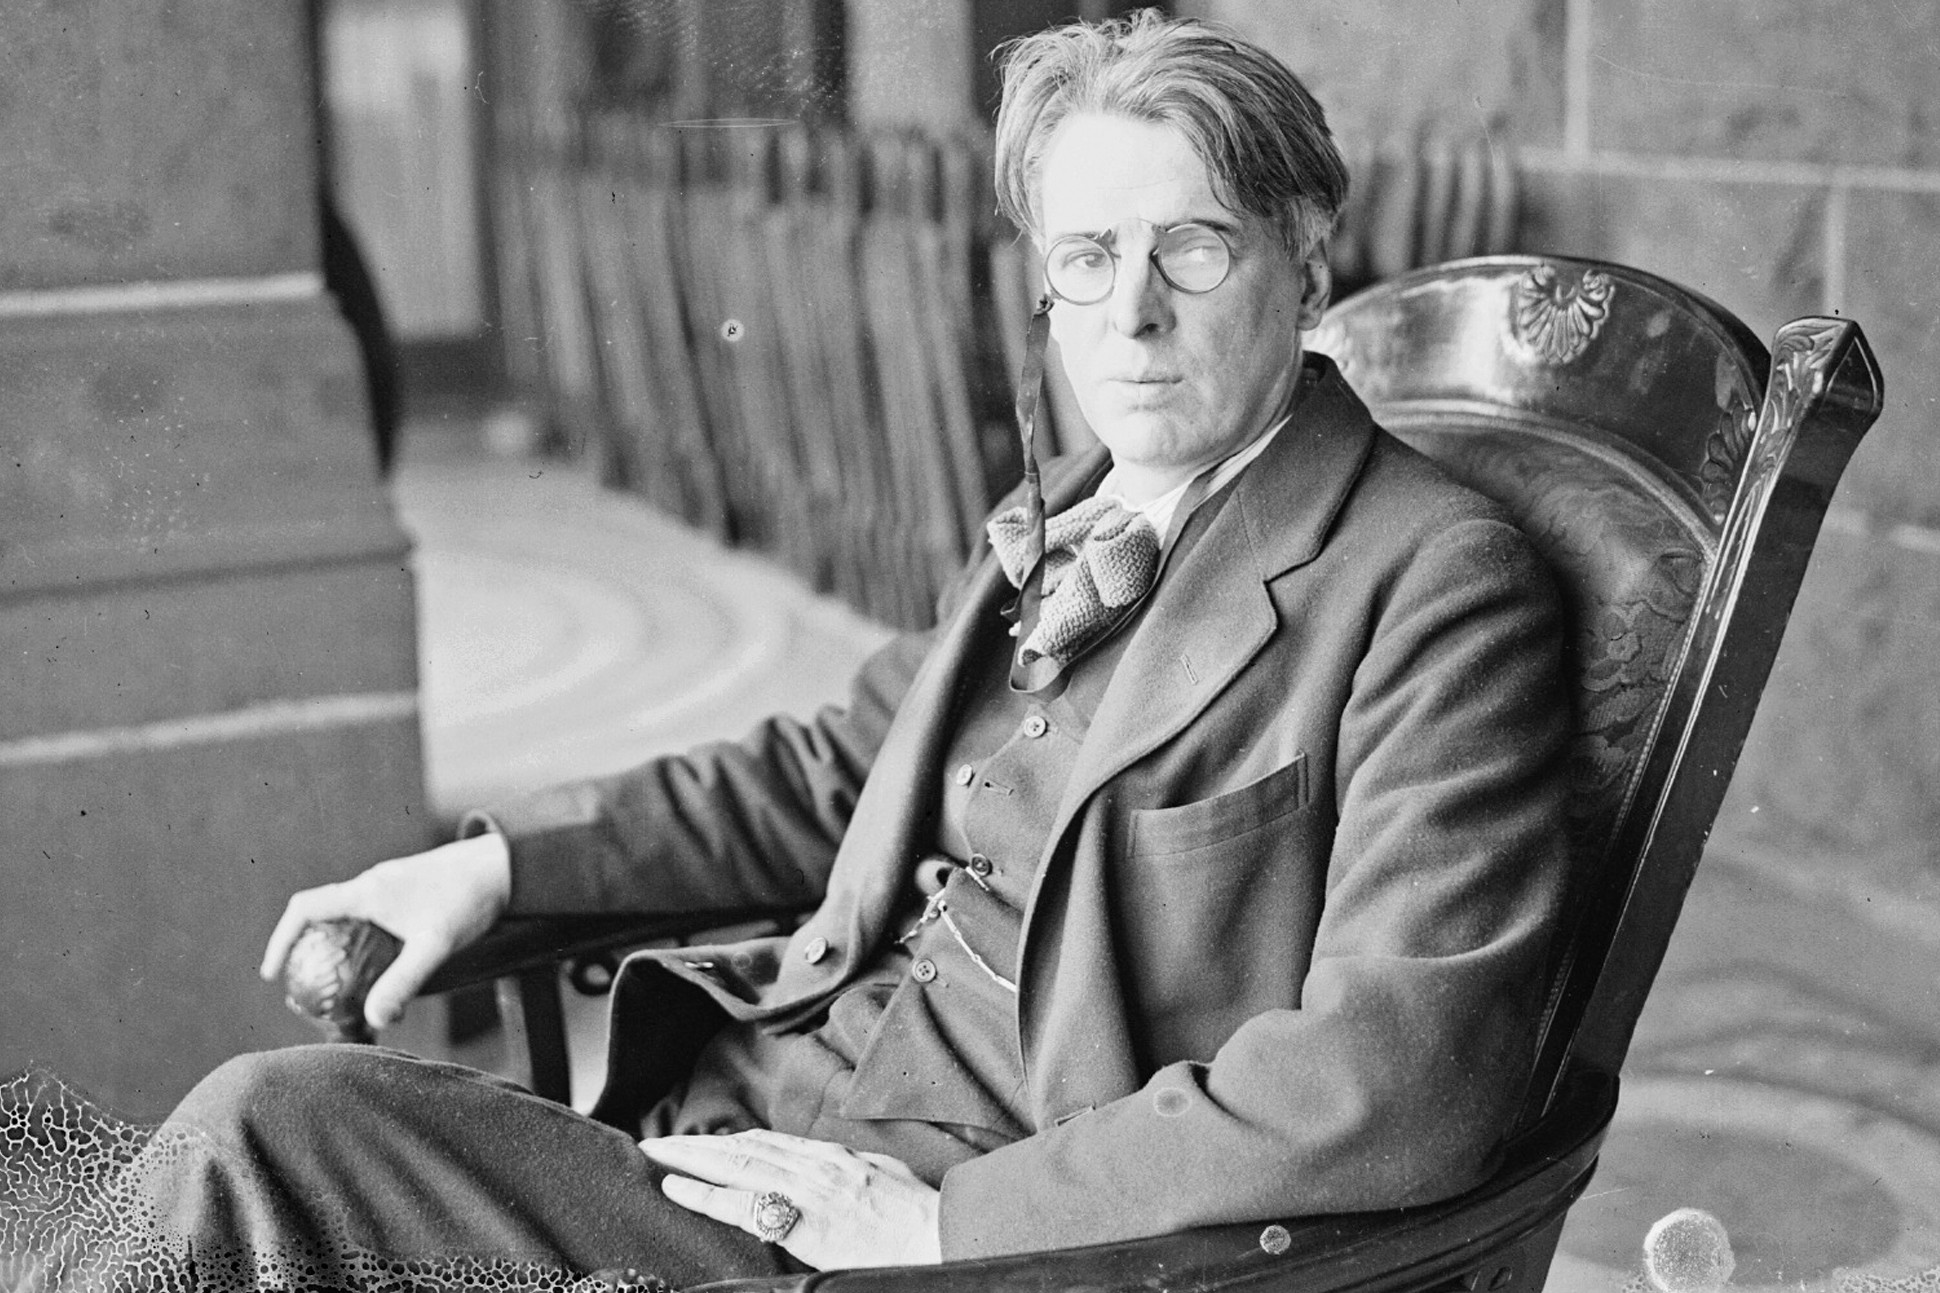 when you are old by william butler yeats meaning